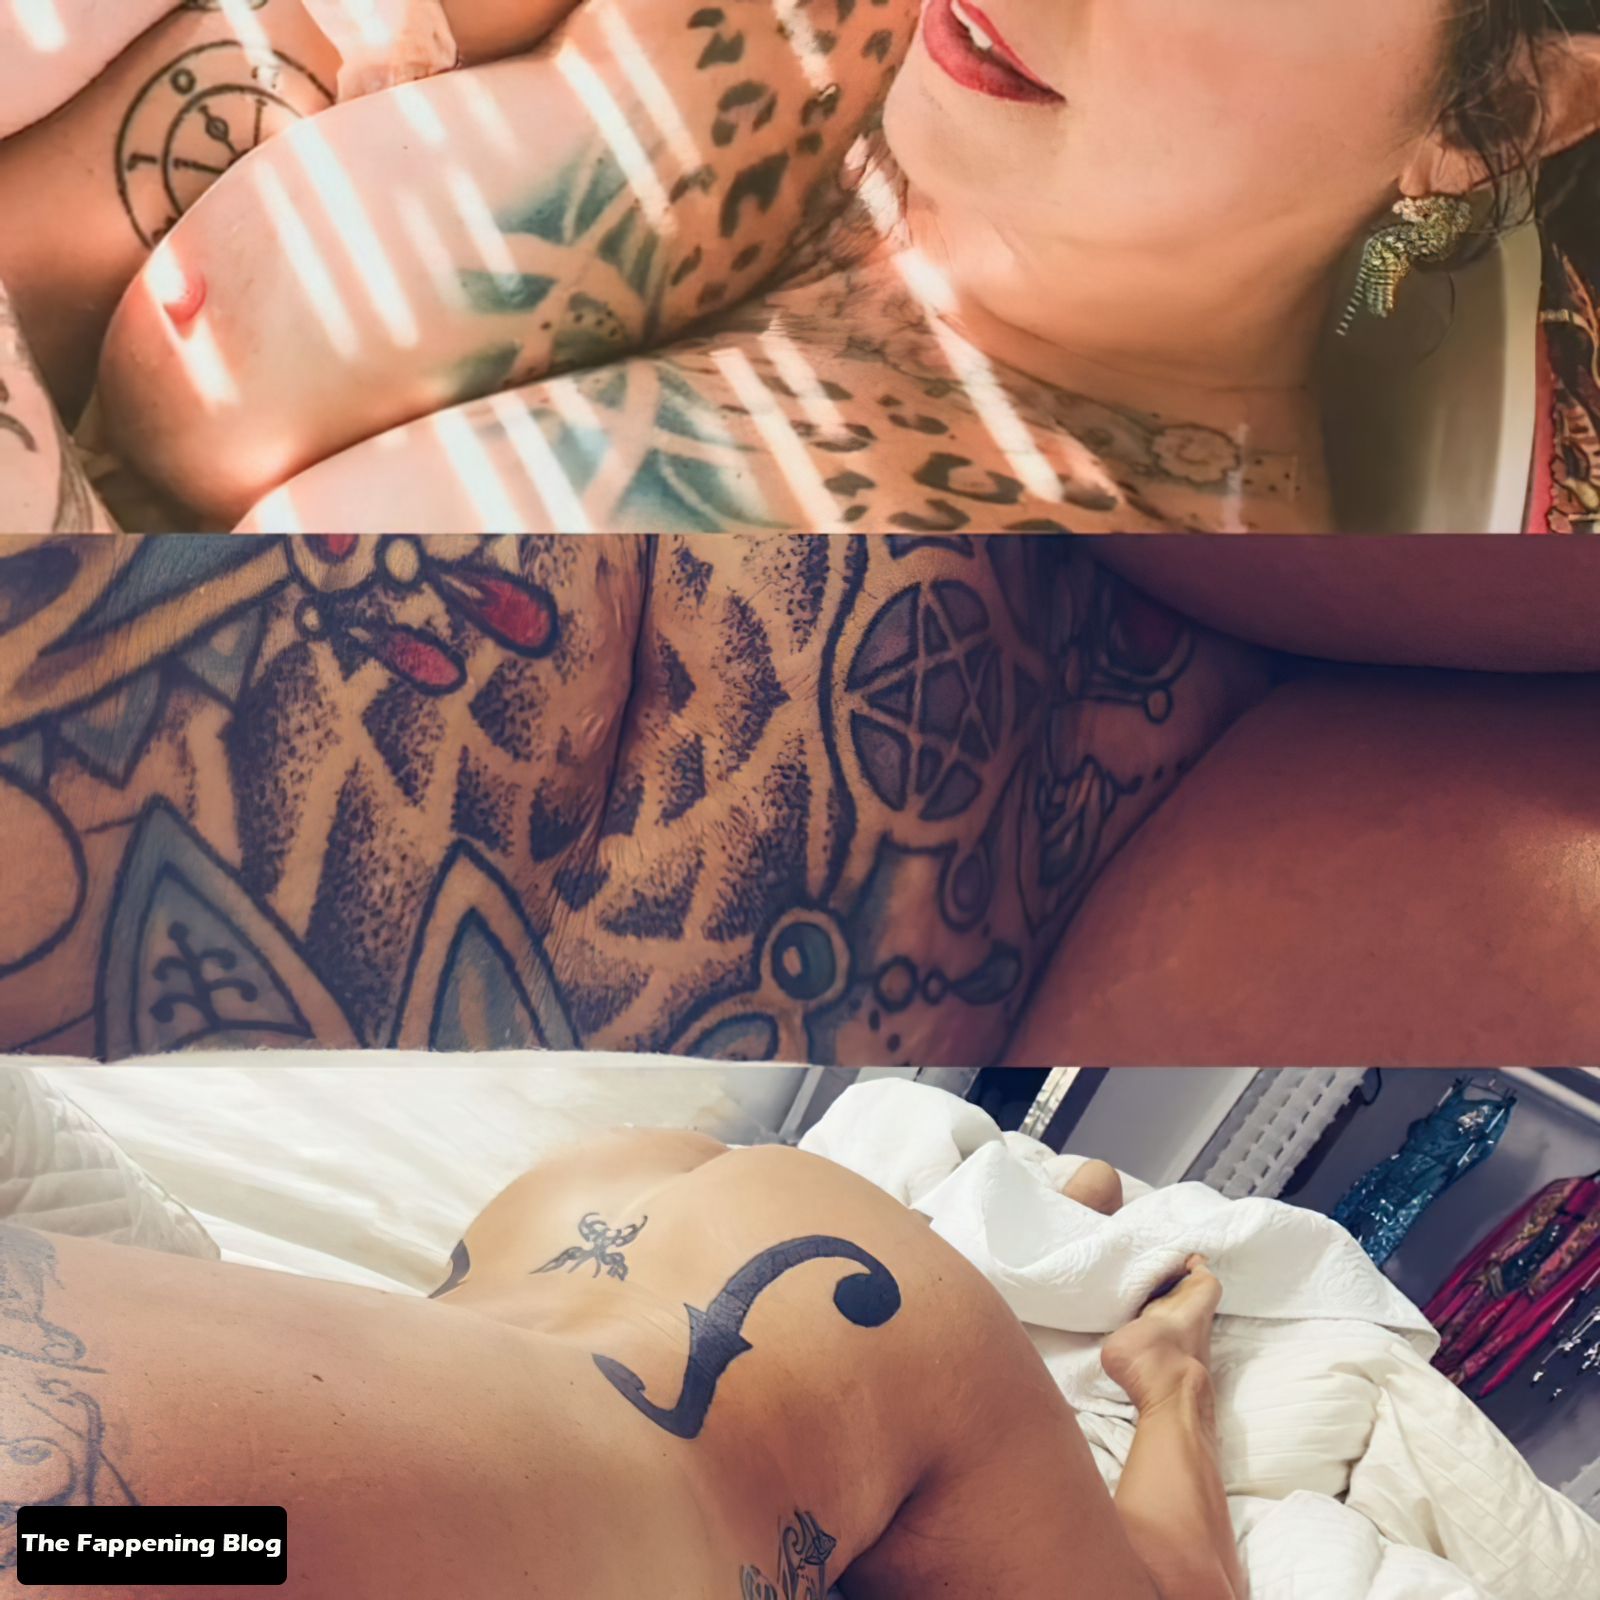 Danielle colby in the nude